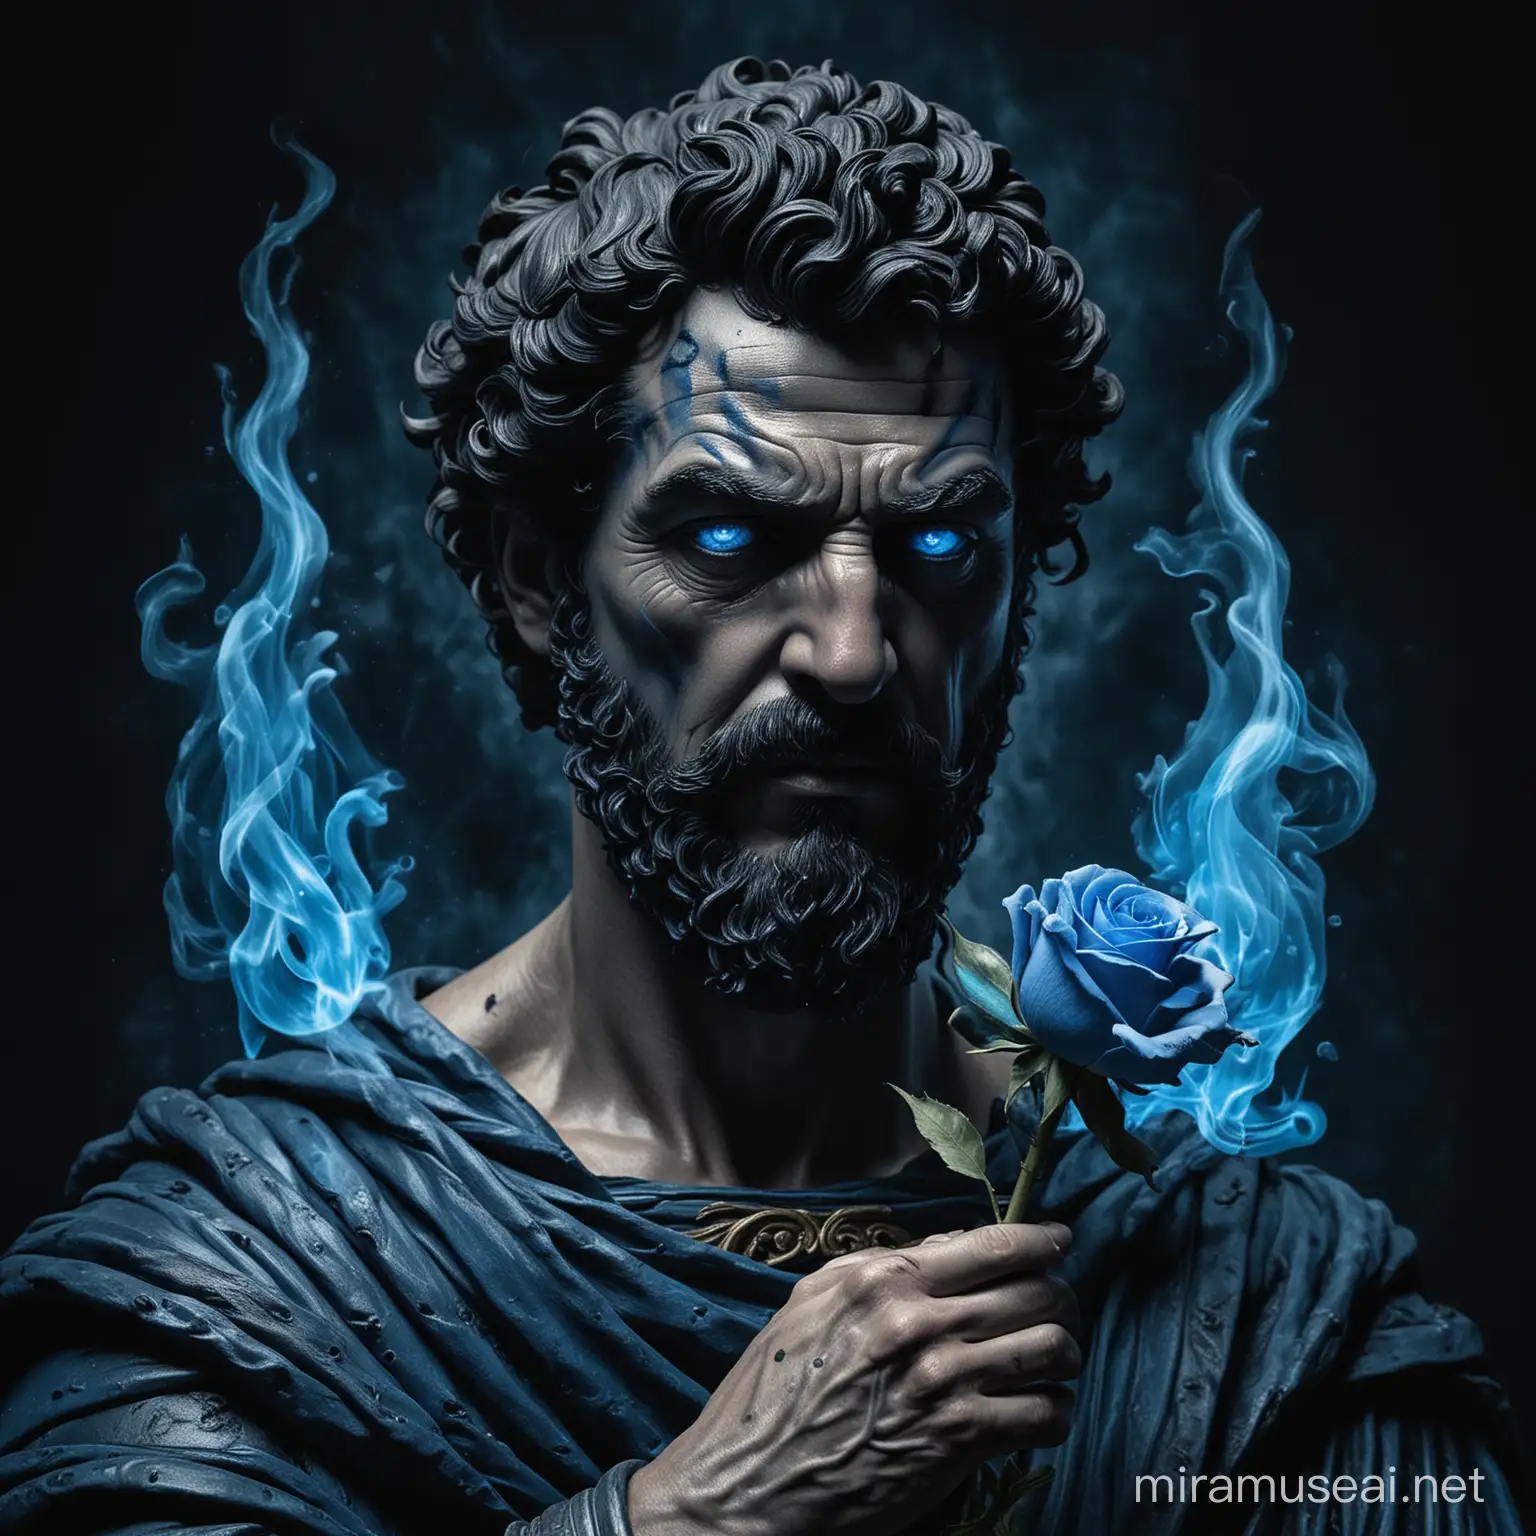 Angry Marcus Aurelius on blue flames holding a Blue rose with a dark background 